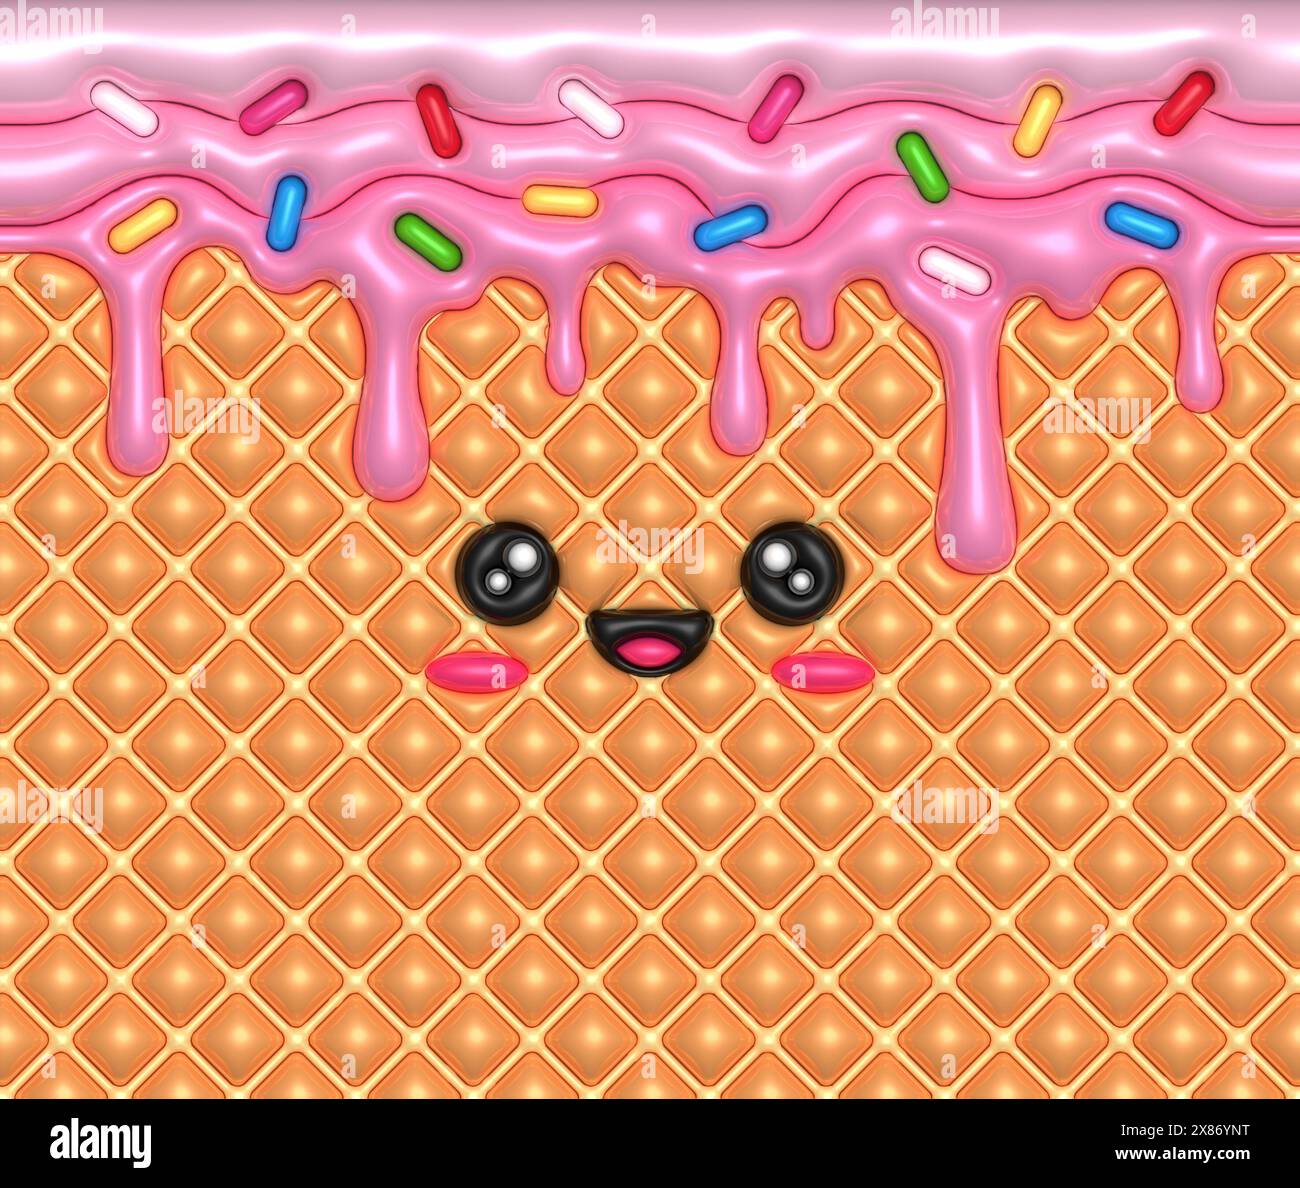 Funny Kawaii pink donut ice cream illustration. 3D Inflated puffy illustration. Stock Photo